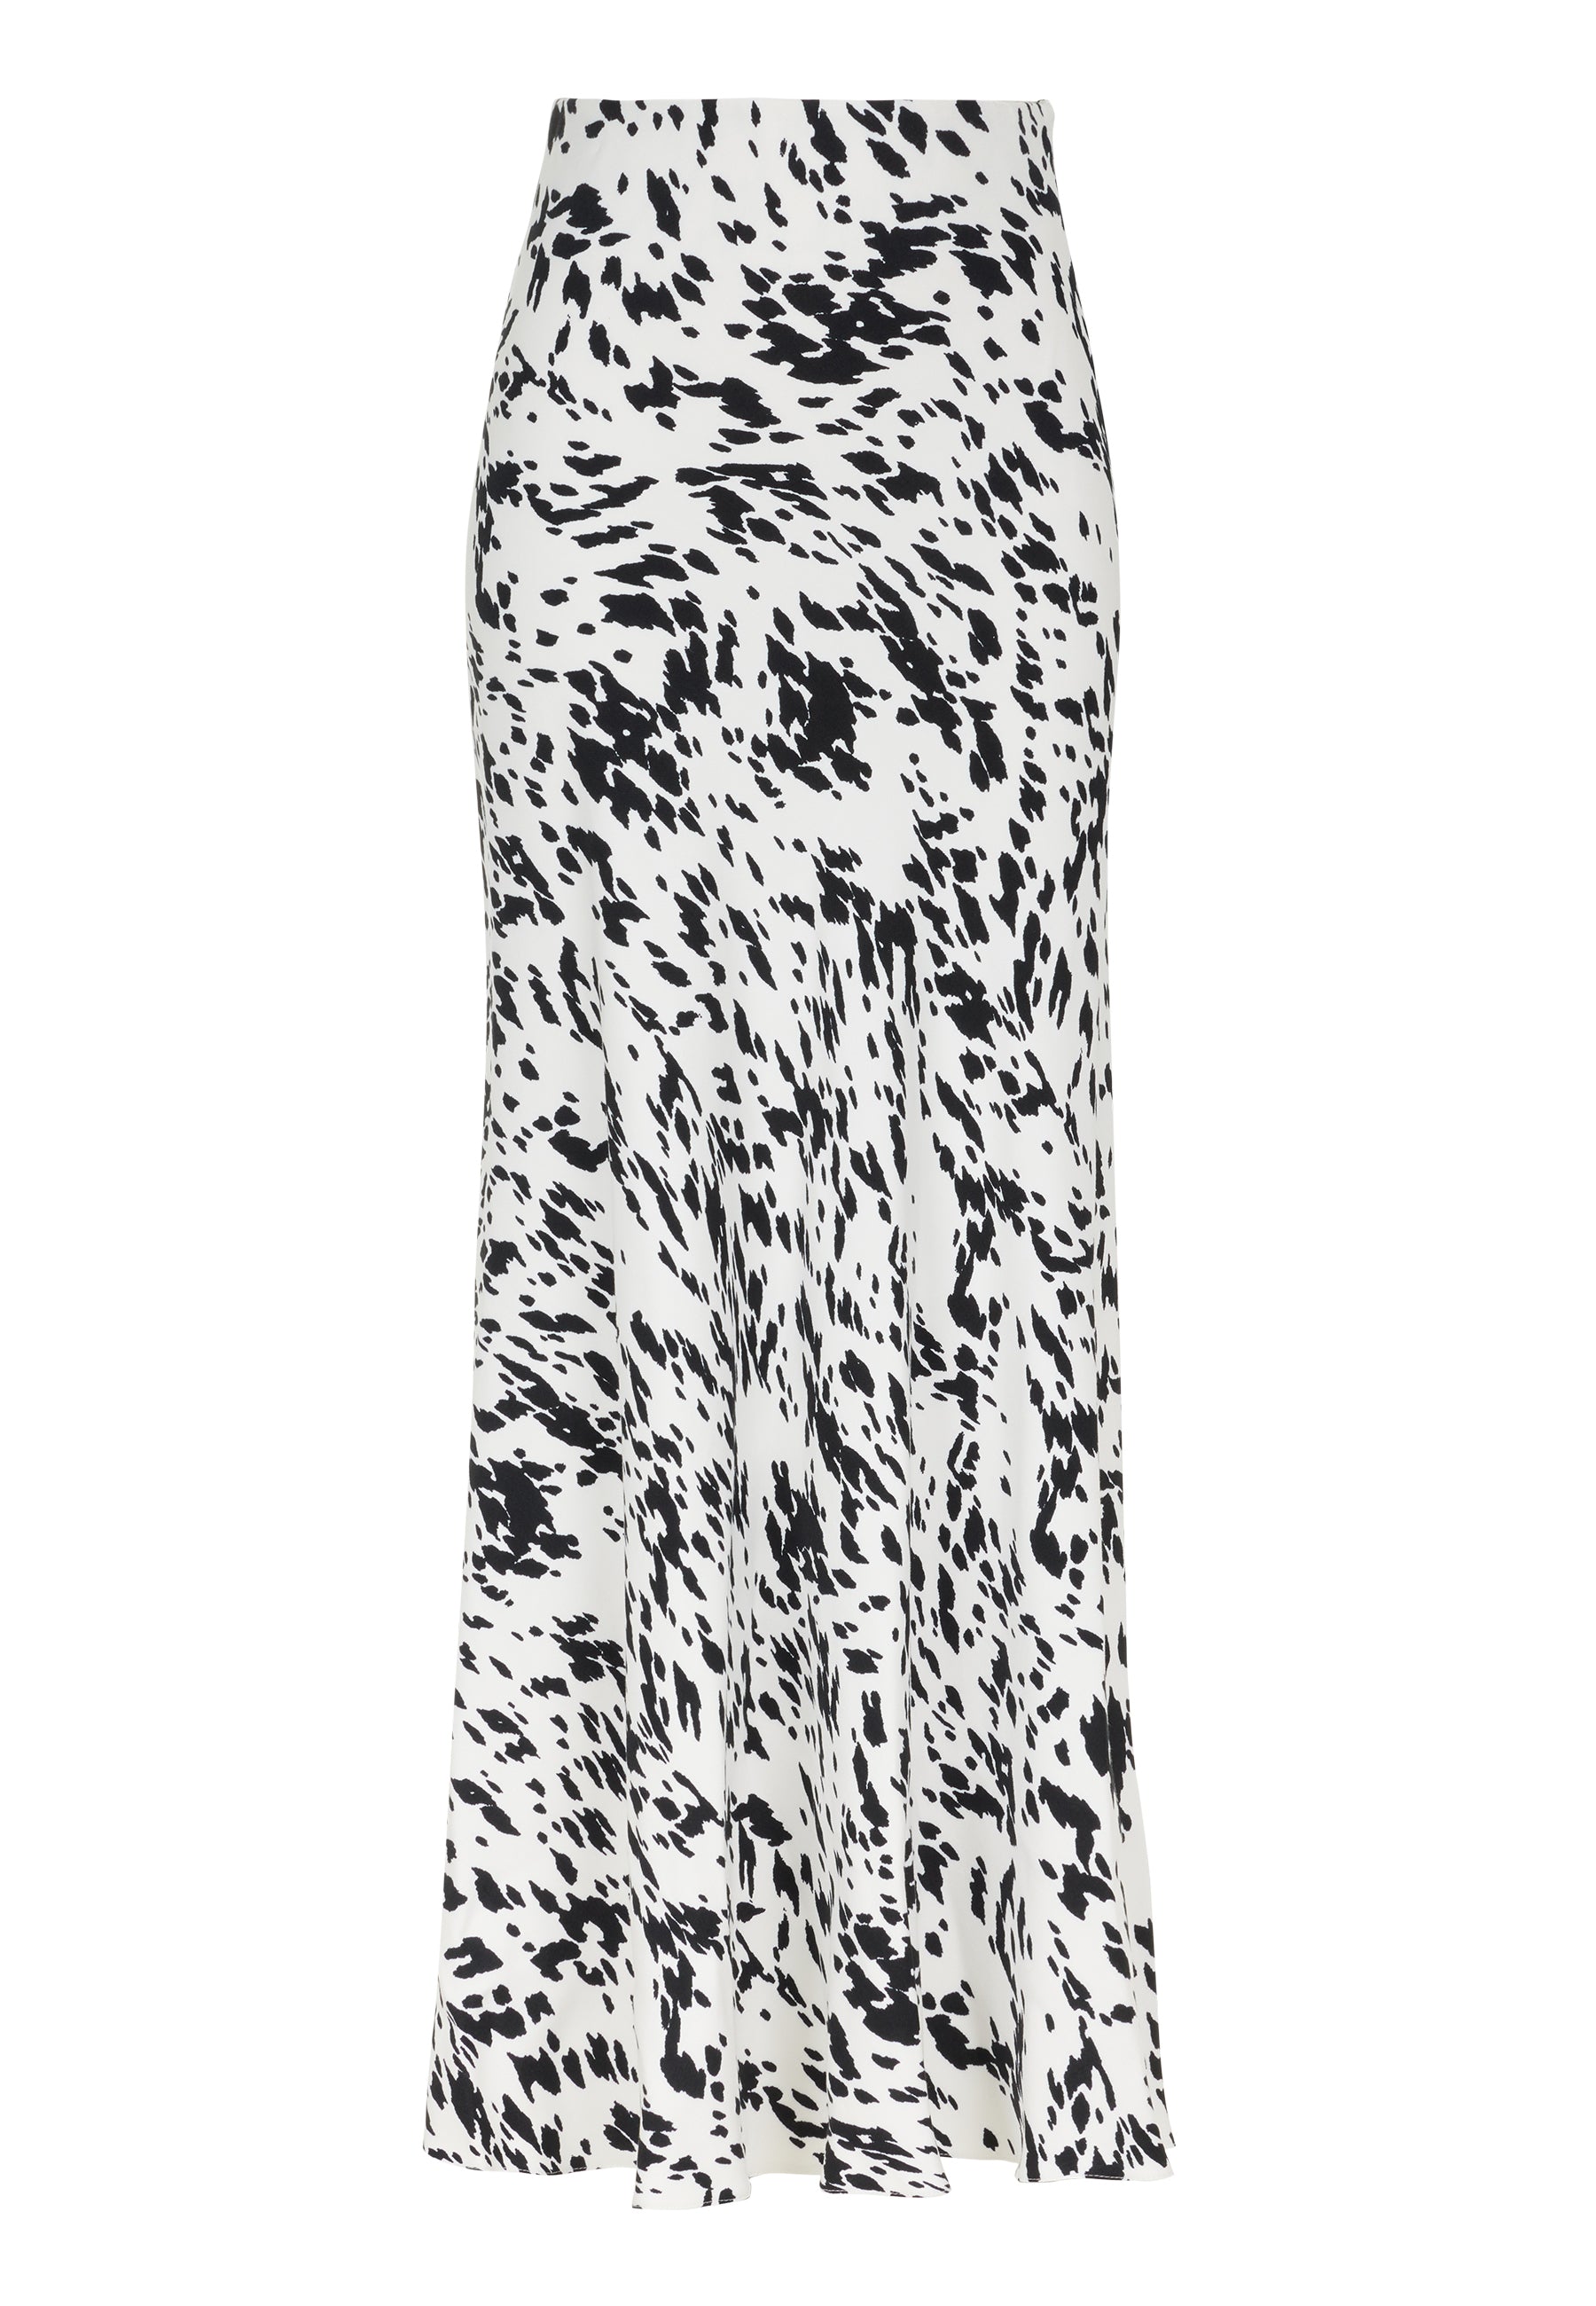 Nocturne Women's Printed Maxi Skirt